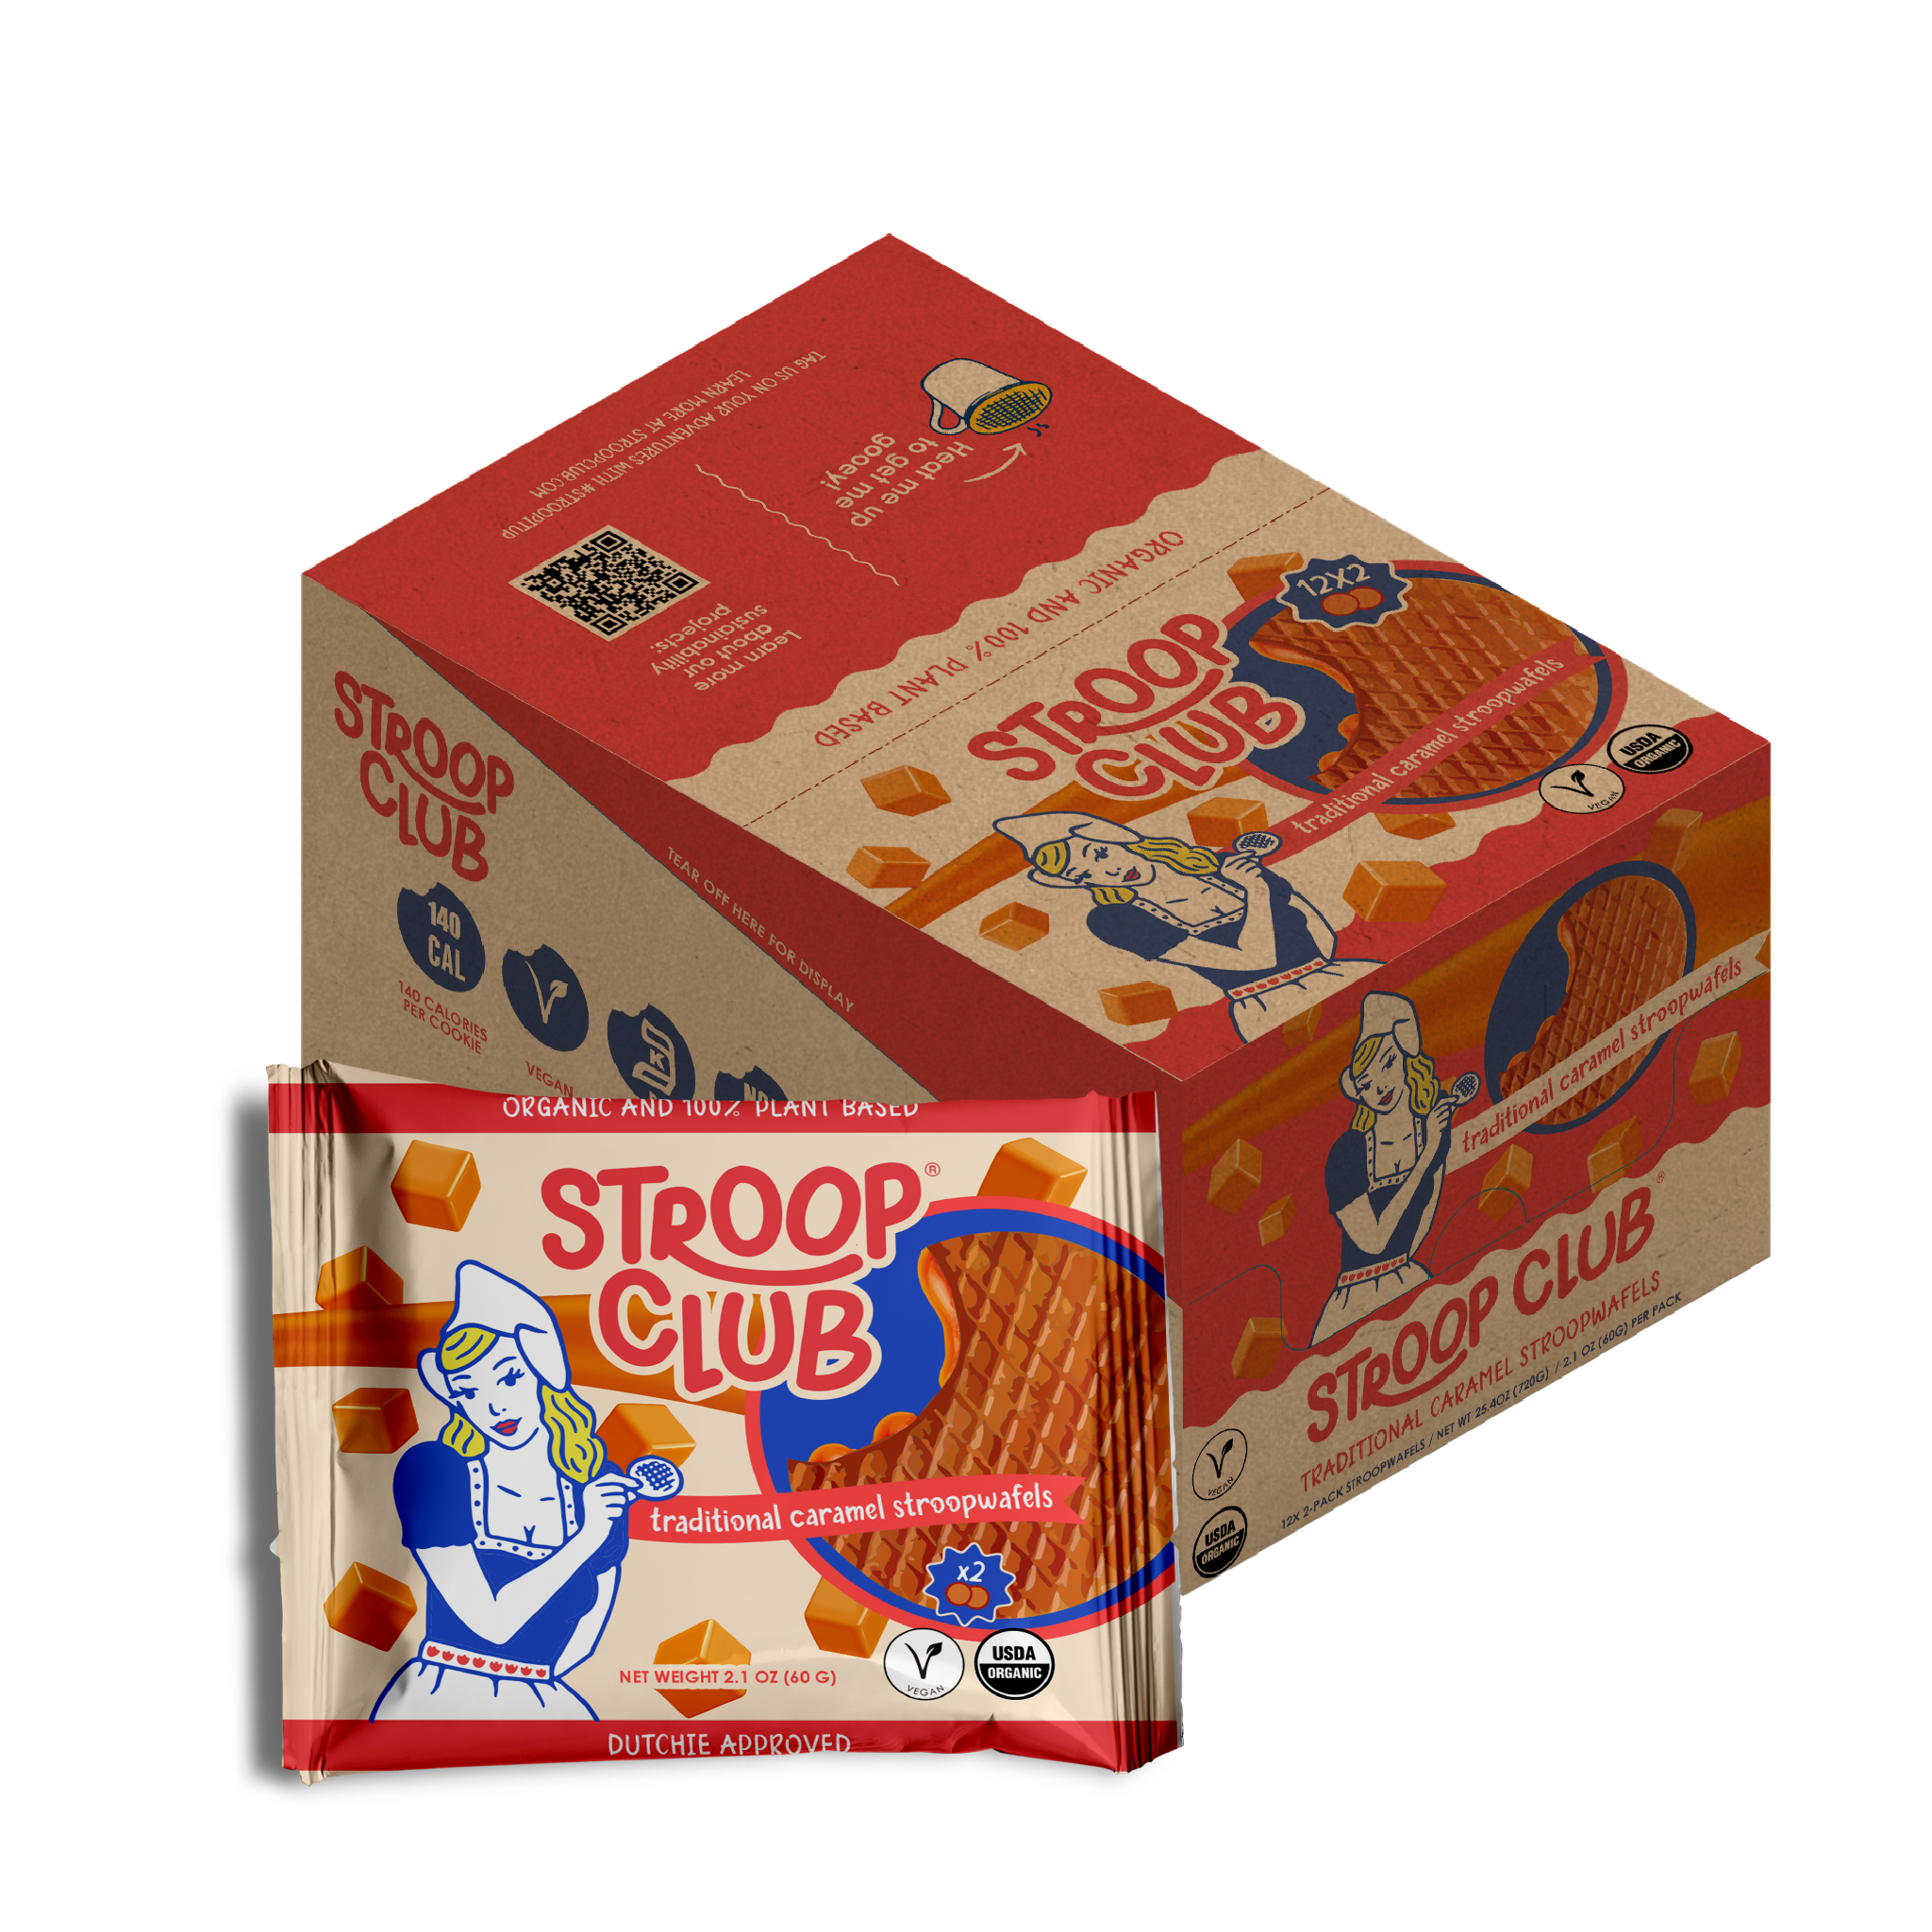 Traditional Caramel Plant Based and Organic Stroopwafels (box of 12x 2-pack - 24 total)